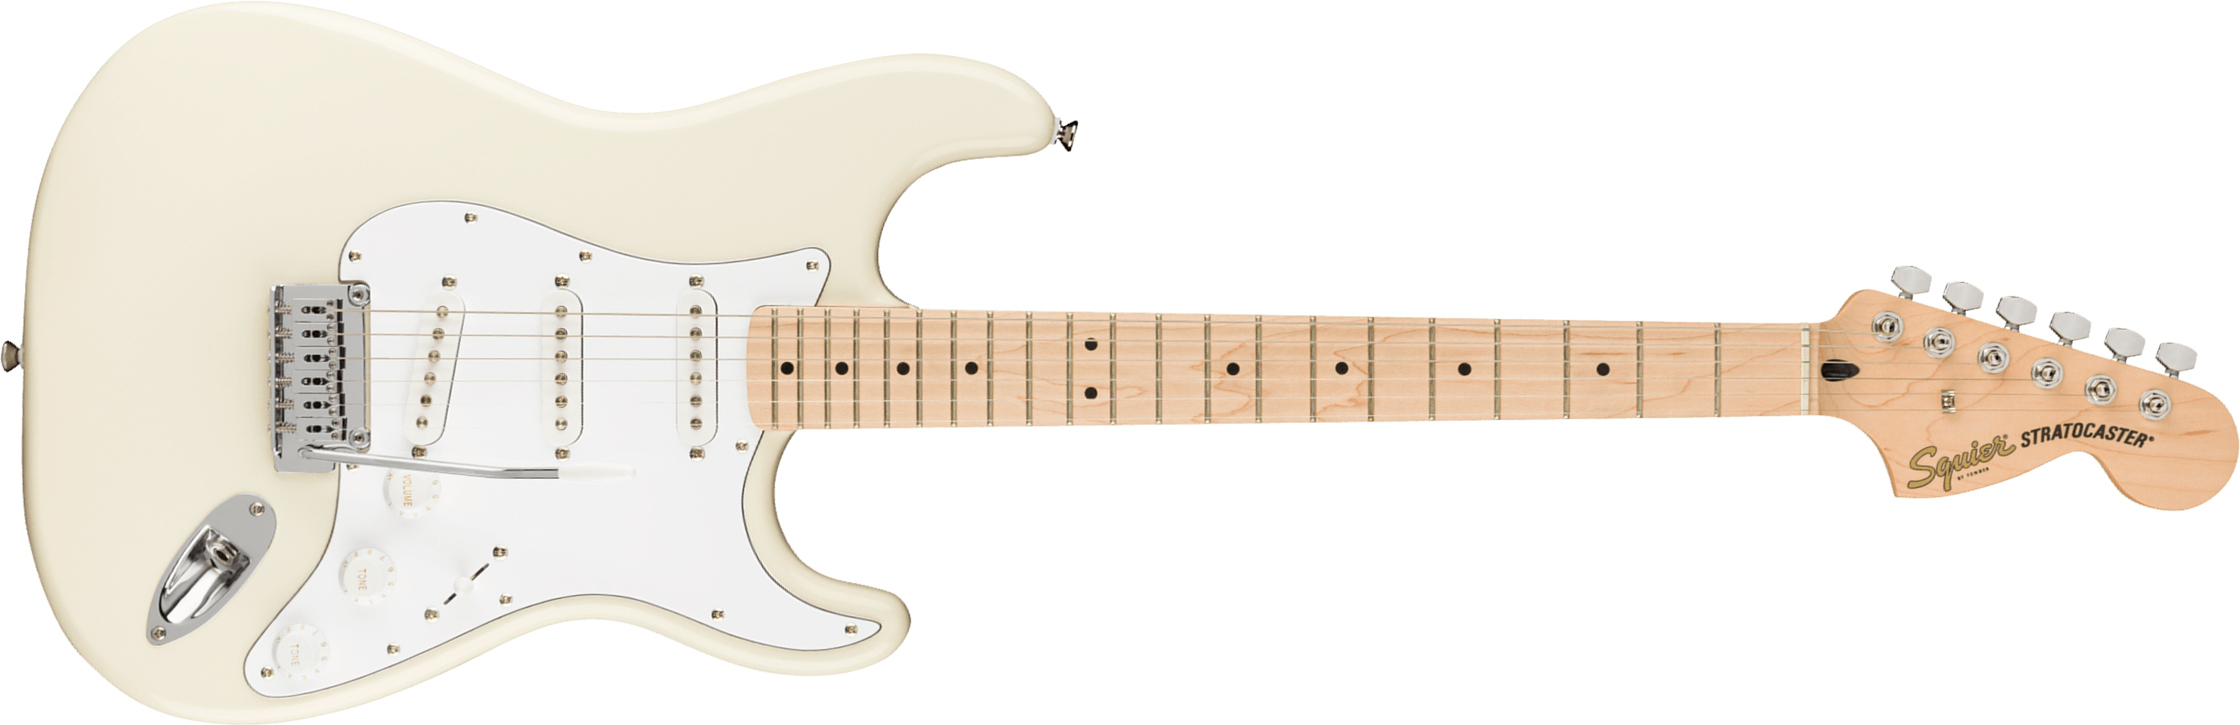 Squier Strat Affinity 2021 Sss Trem Mn - Olympic White - E-Gitarre in Str-Form - Main picture